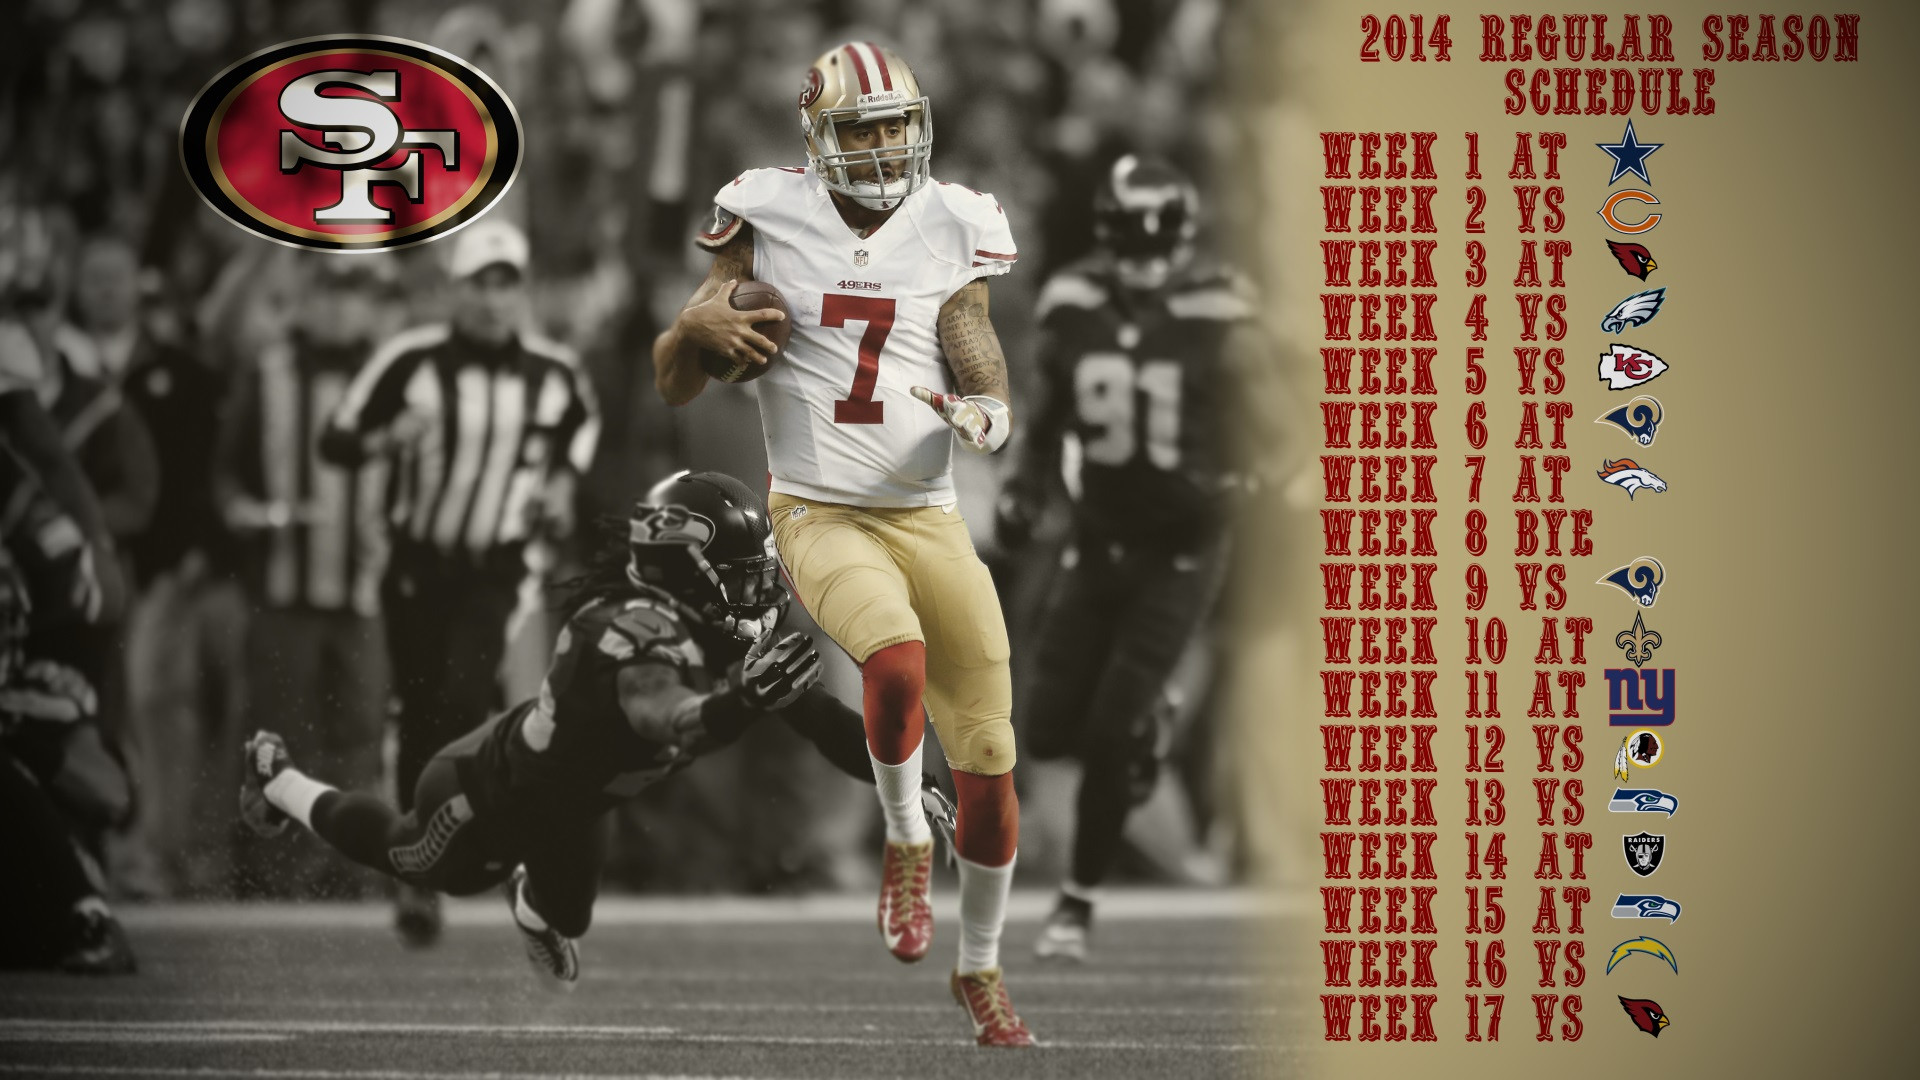 49ers 2014 Schedule 49ers 2014 schedule cell